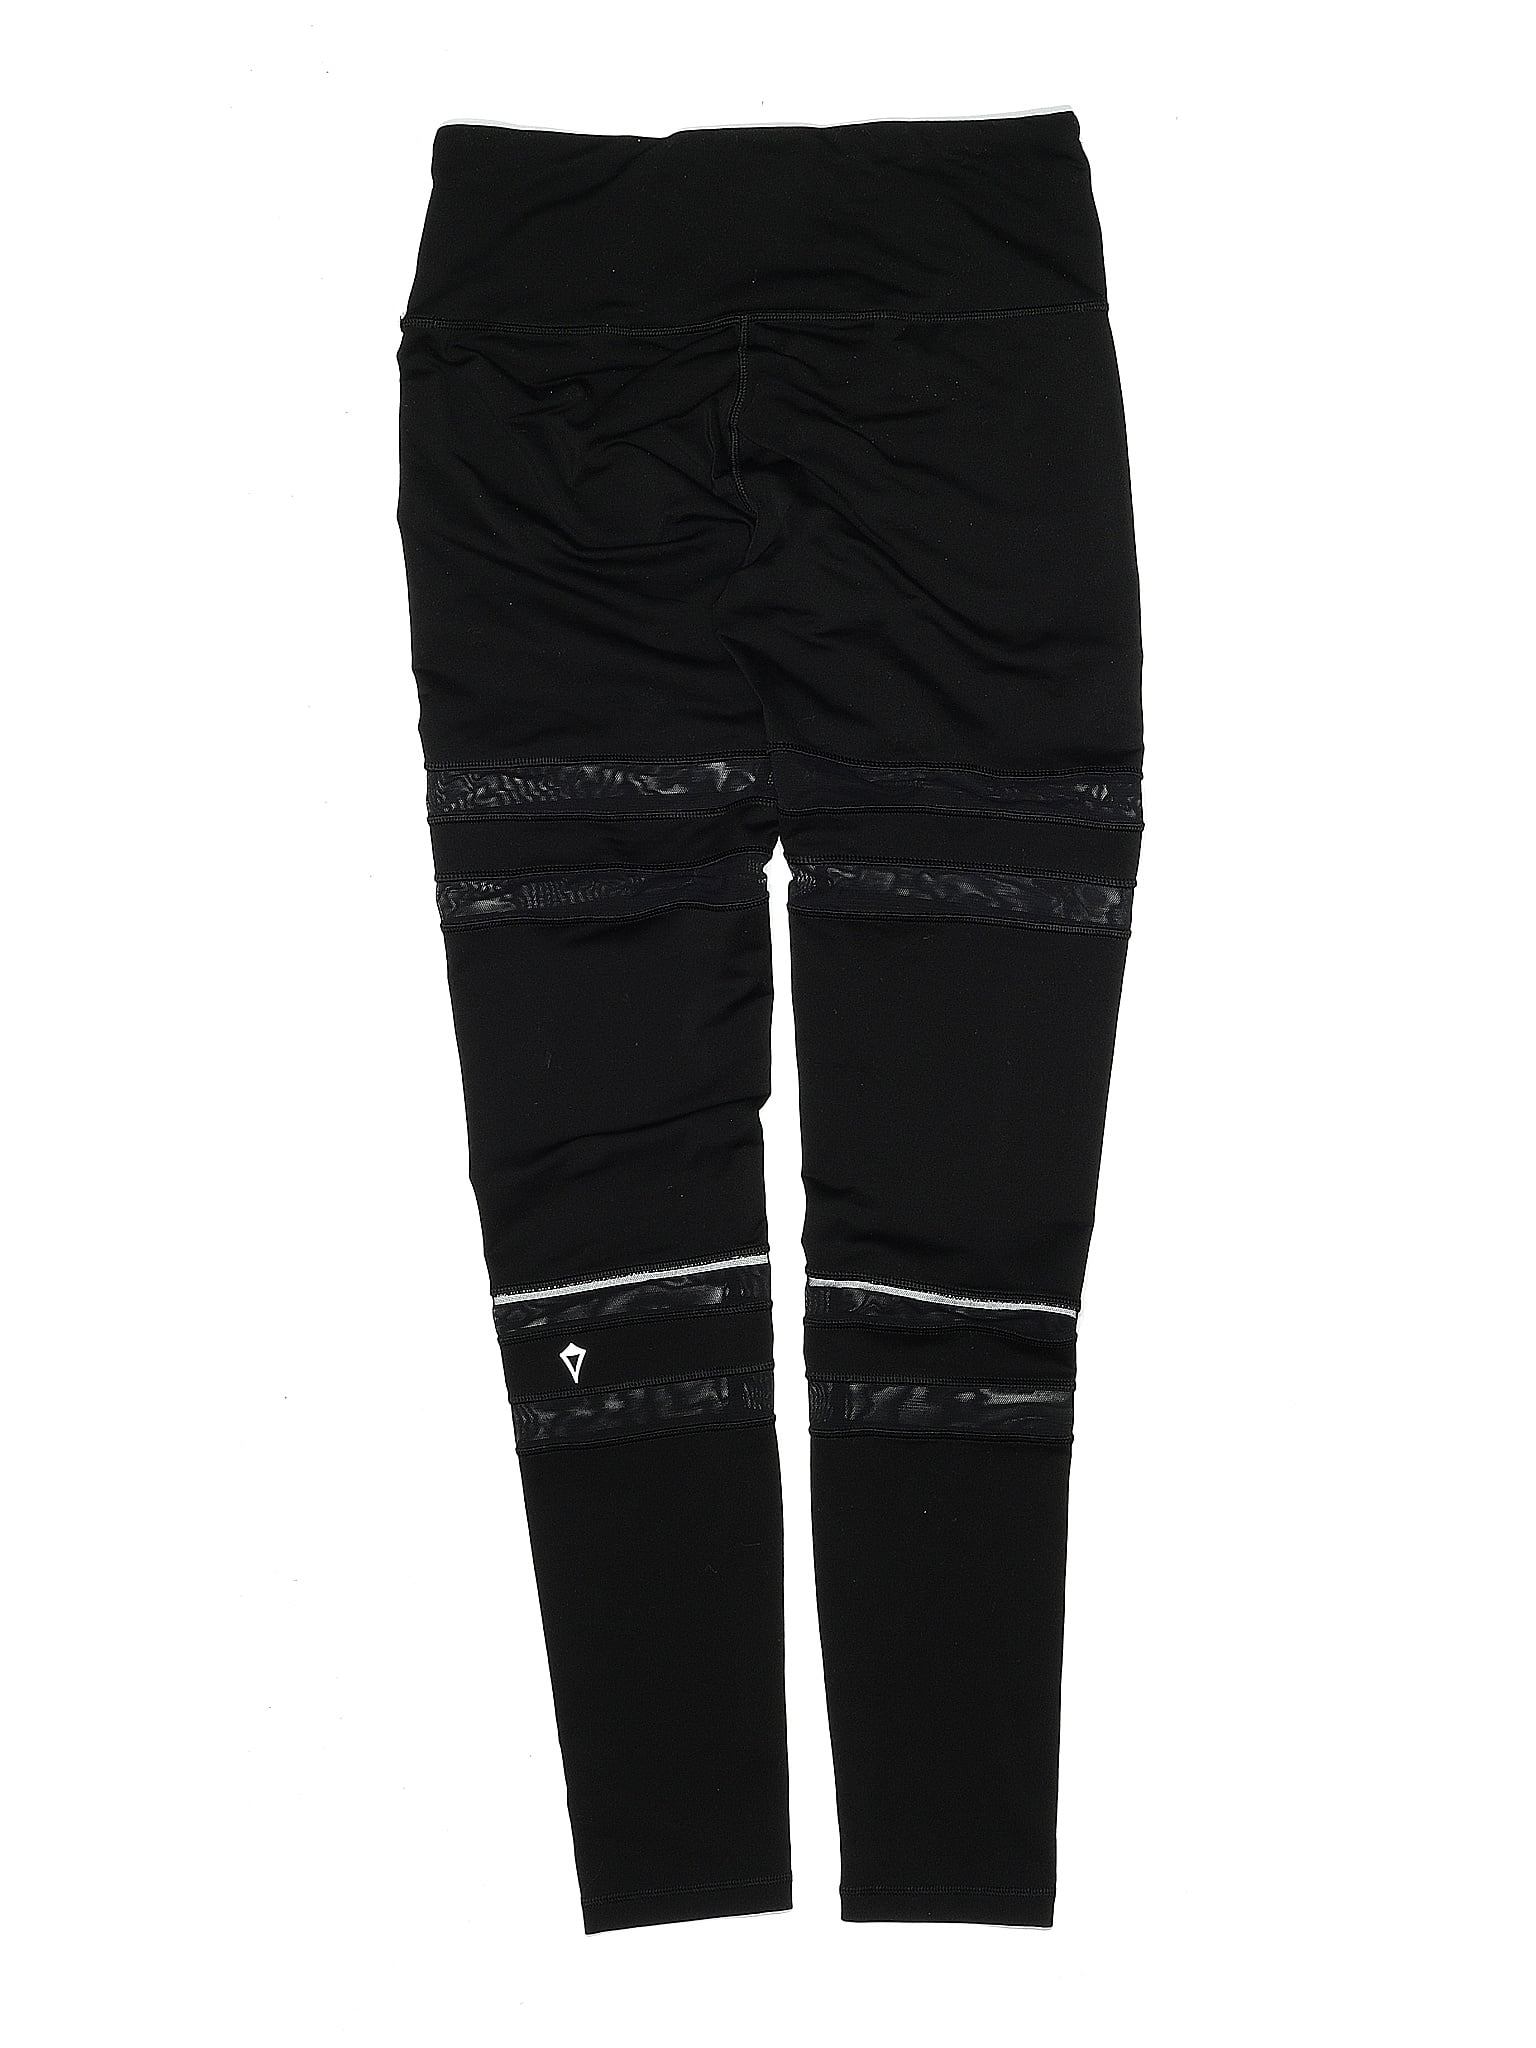 Find more Ivivva By Lululemon Leggings Size 14. for sale at up to 90% off